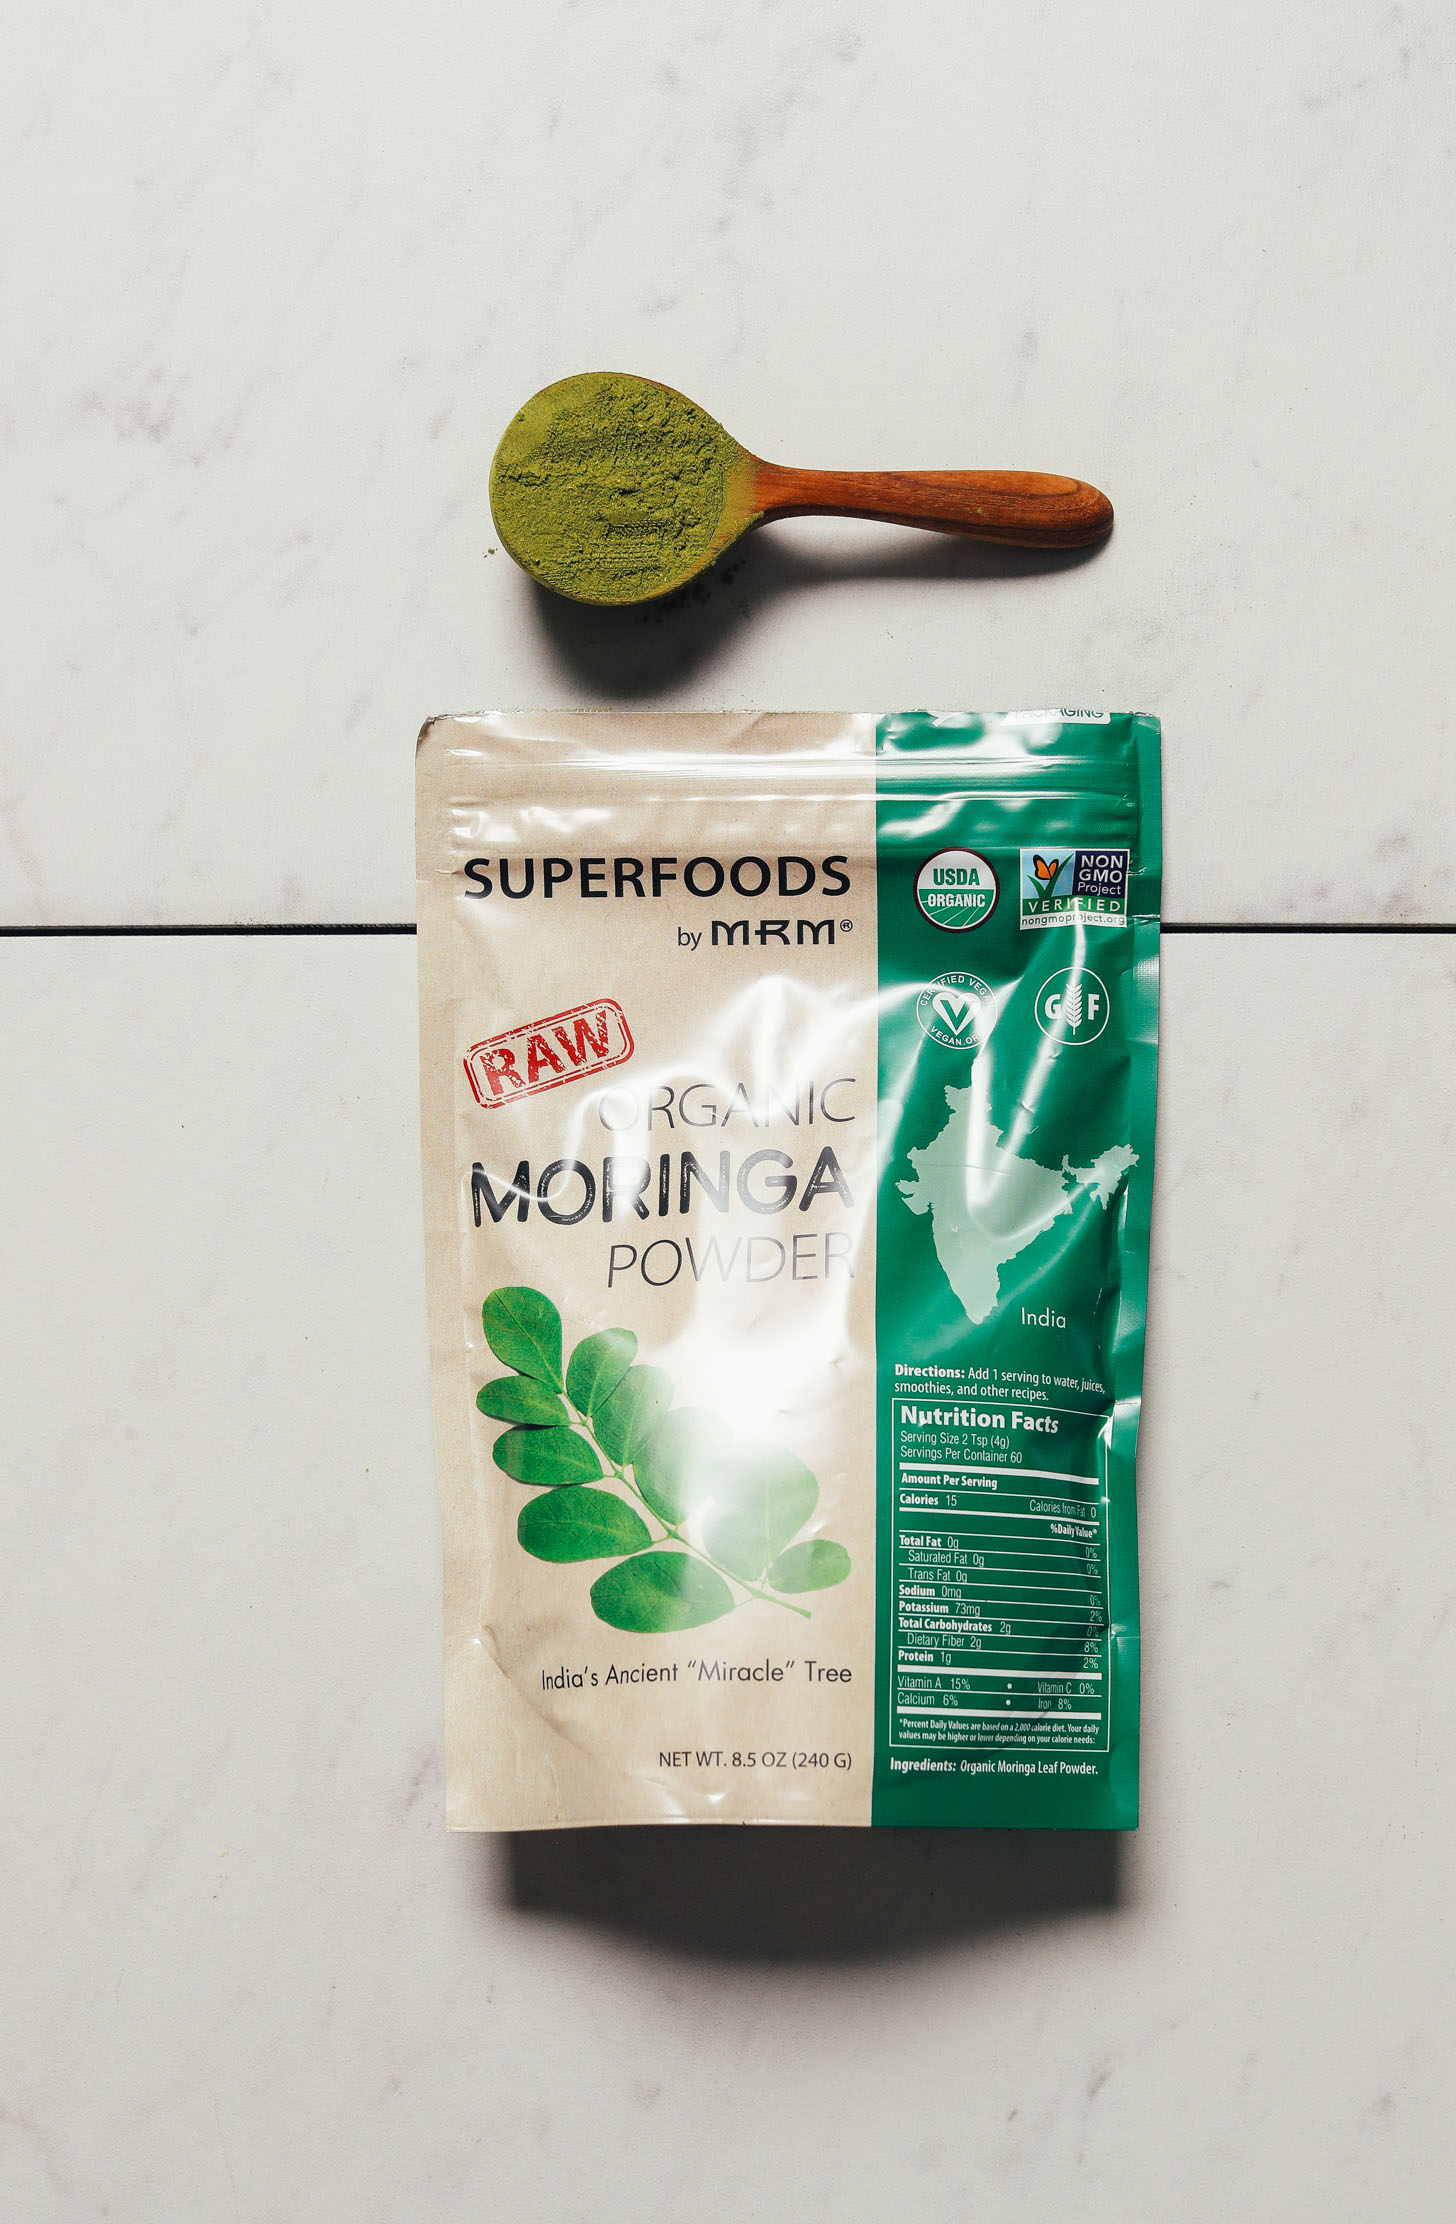 Bag and spoonful of MRM Superfoods Moringa Powder for our review of the best moringa brands